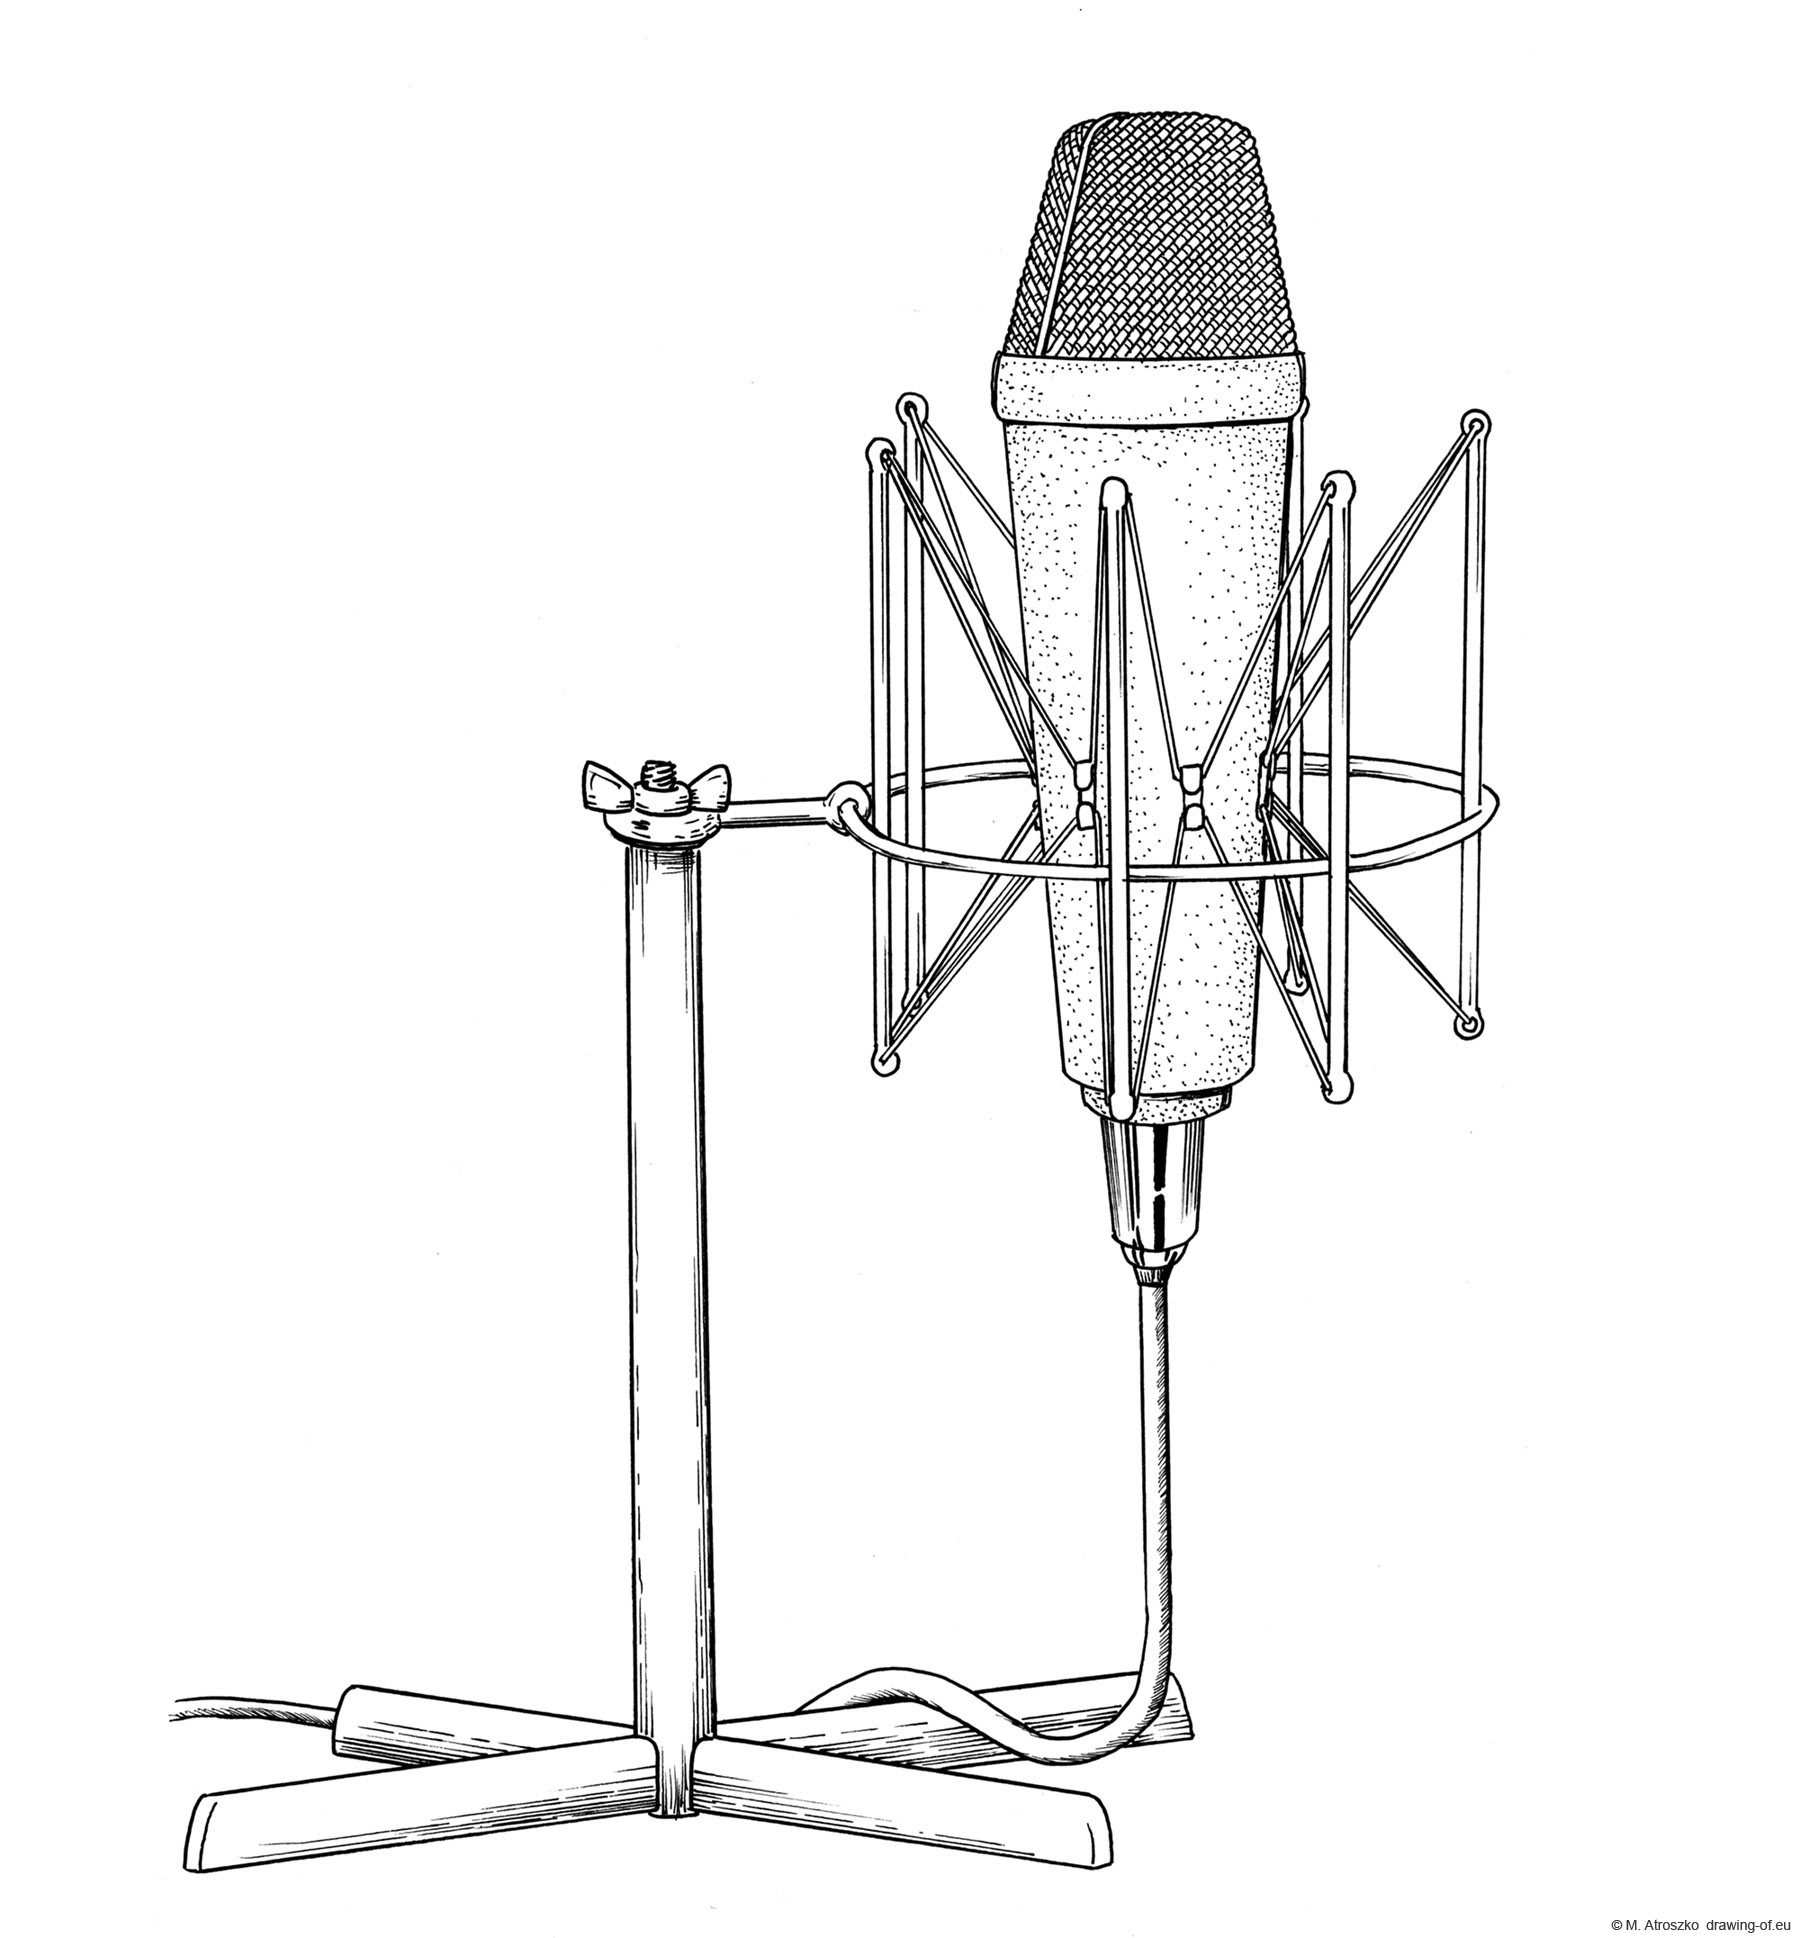 Drawing of microphone